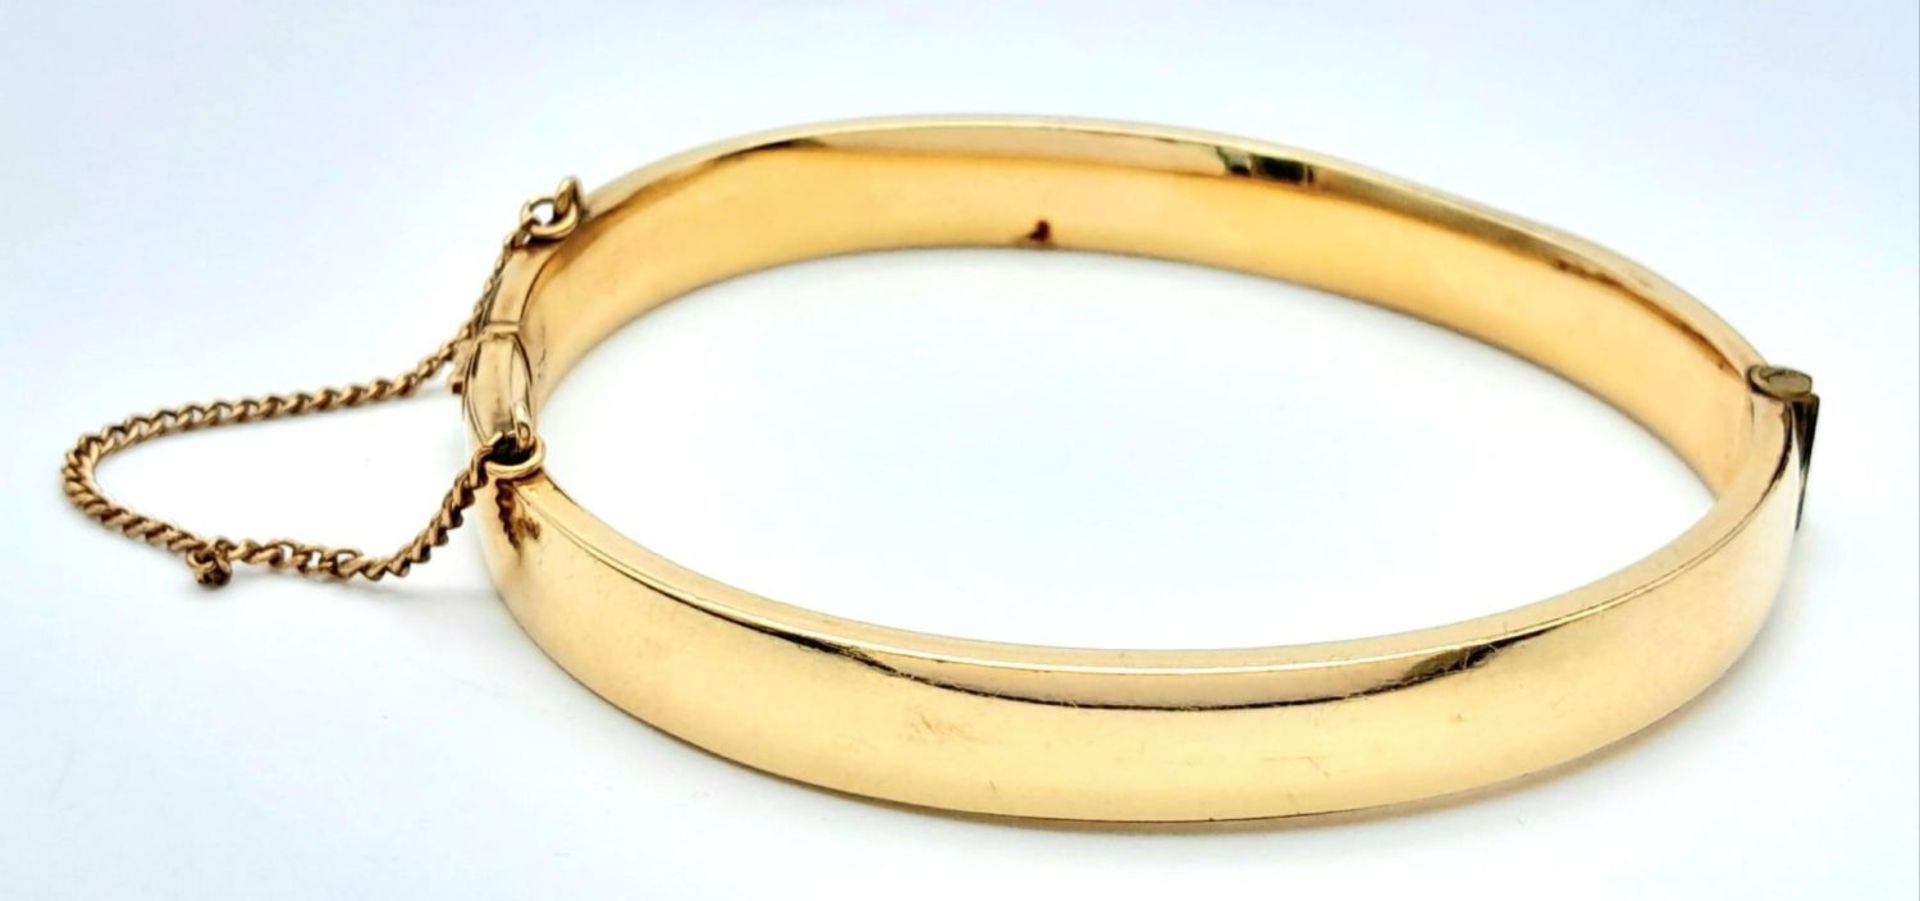 A Vintage 9K (1/5 gold plated) Decorative Bangle. 11.26g total weight. - Image 7 of 12